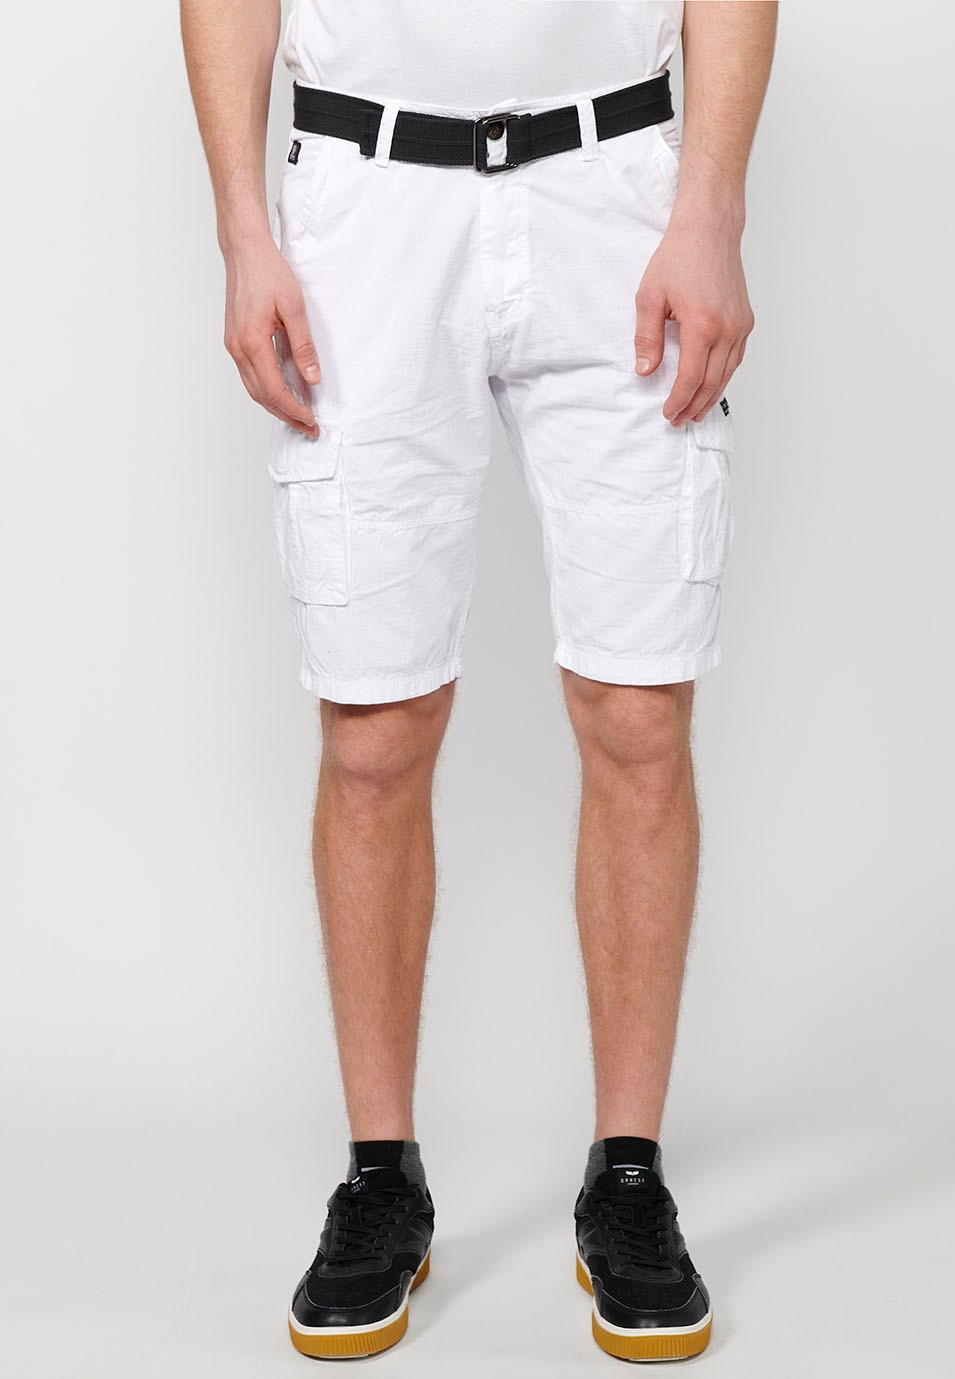 Cotton cargo shorts with belt and front closure with zipper and button with pockets, two back pockets with flap and two cargo pants in White for Men 4